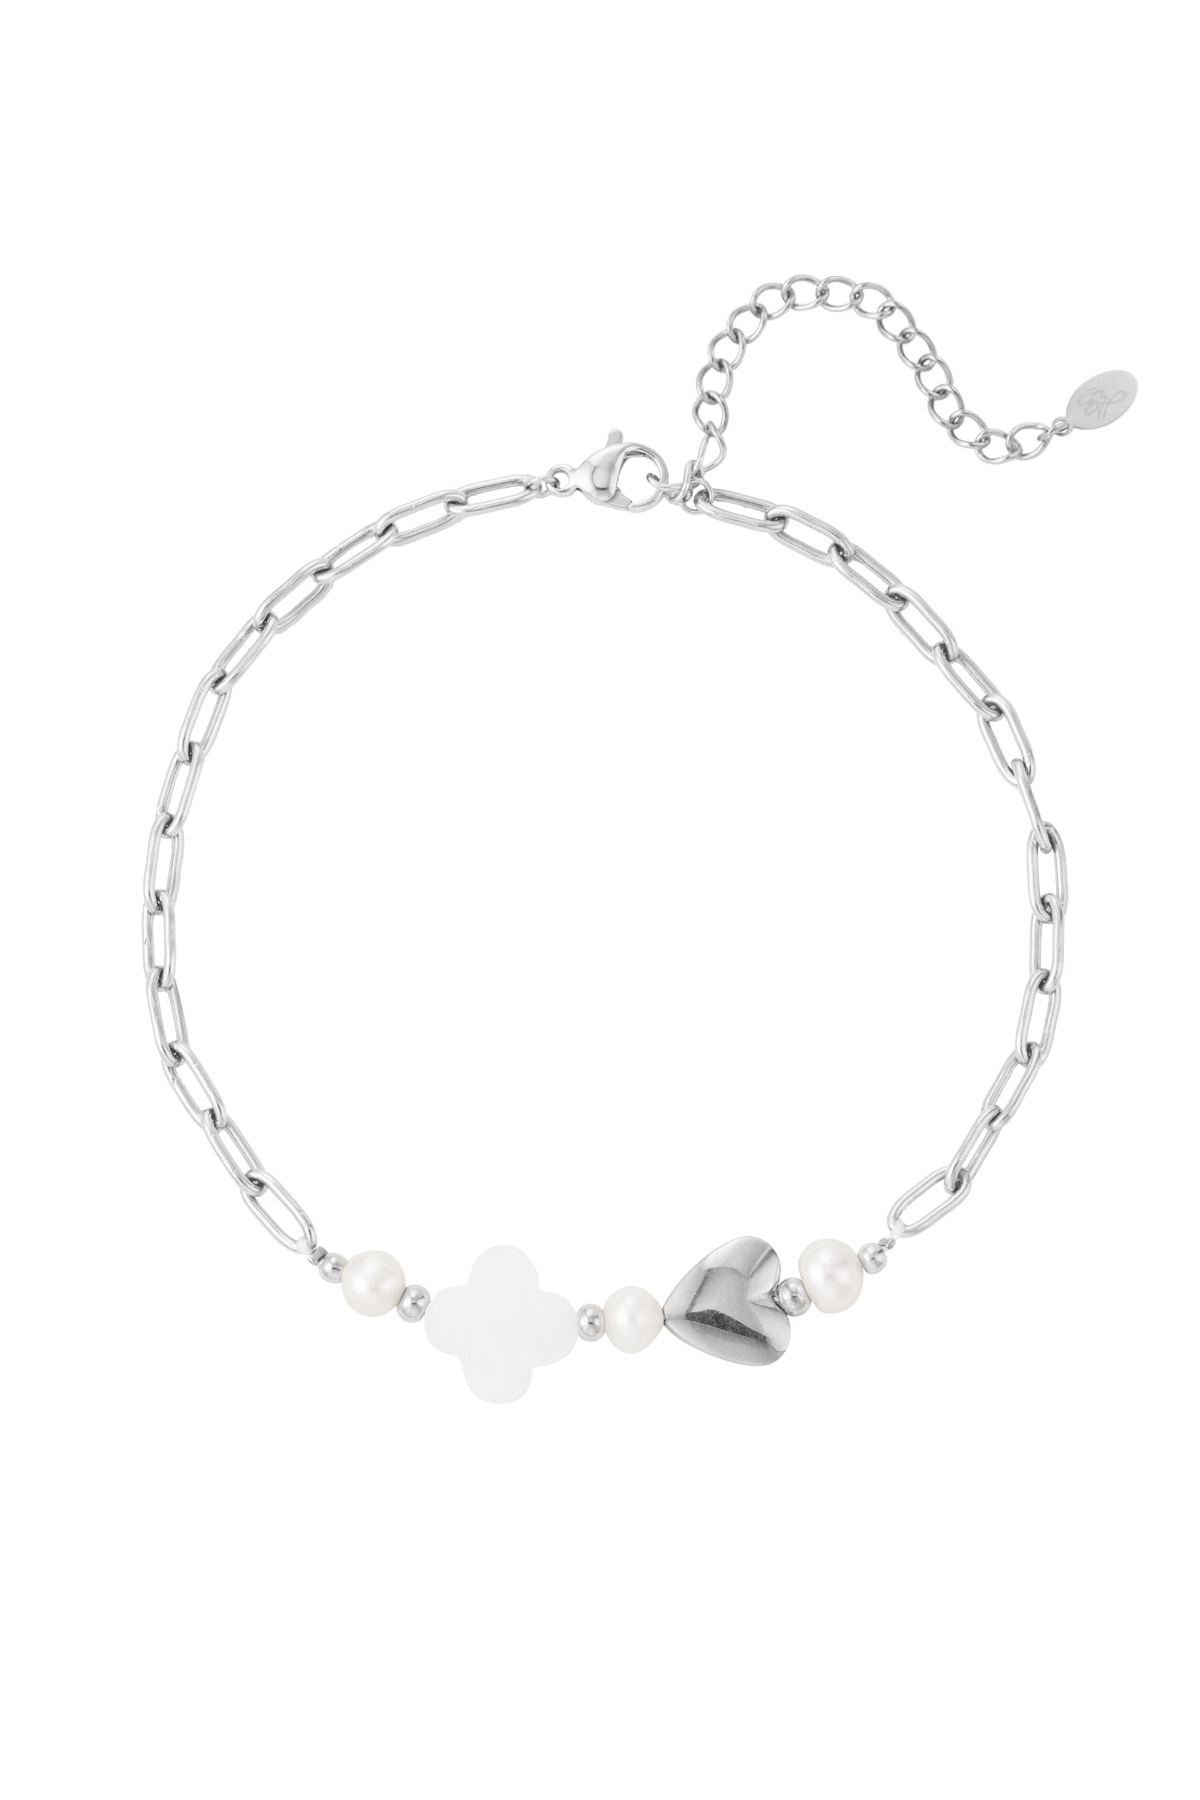 Anklet charms - silver h5 